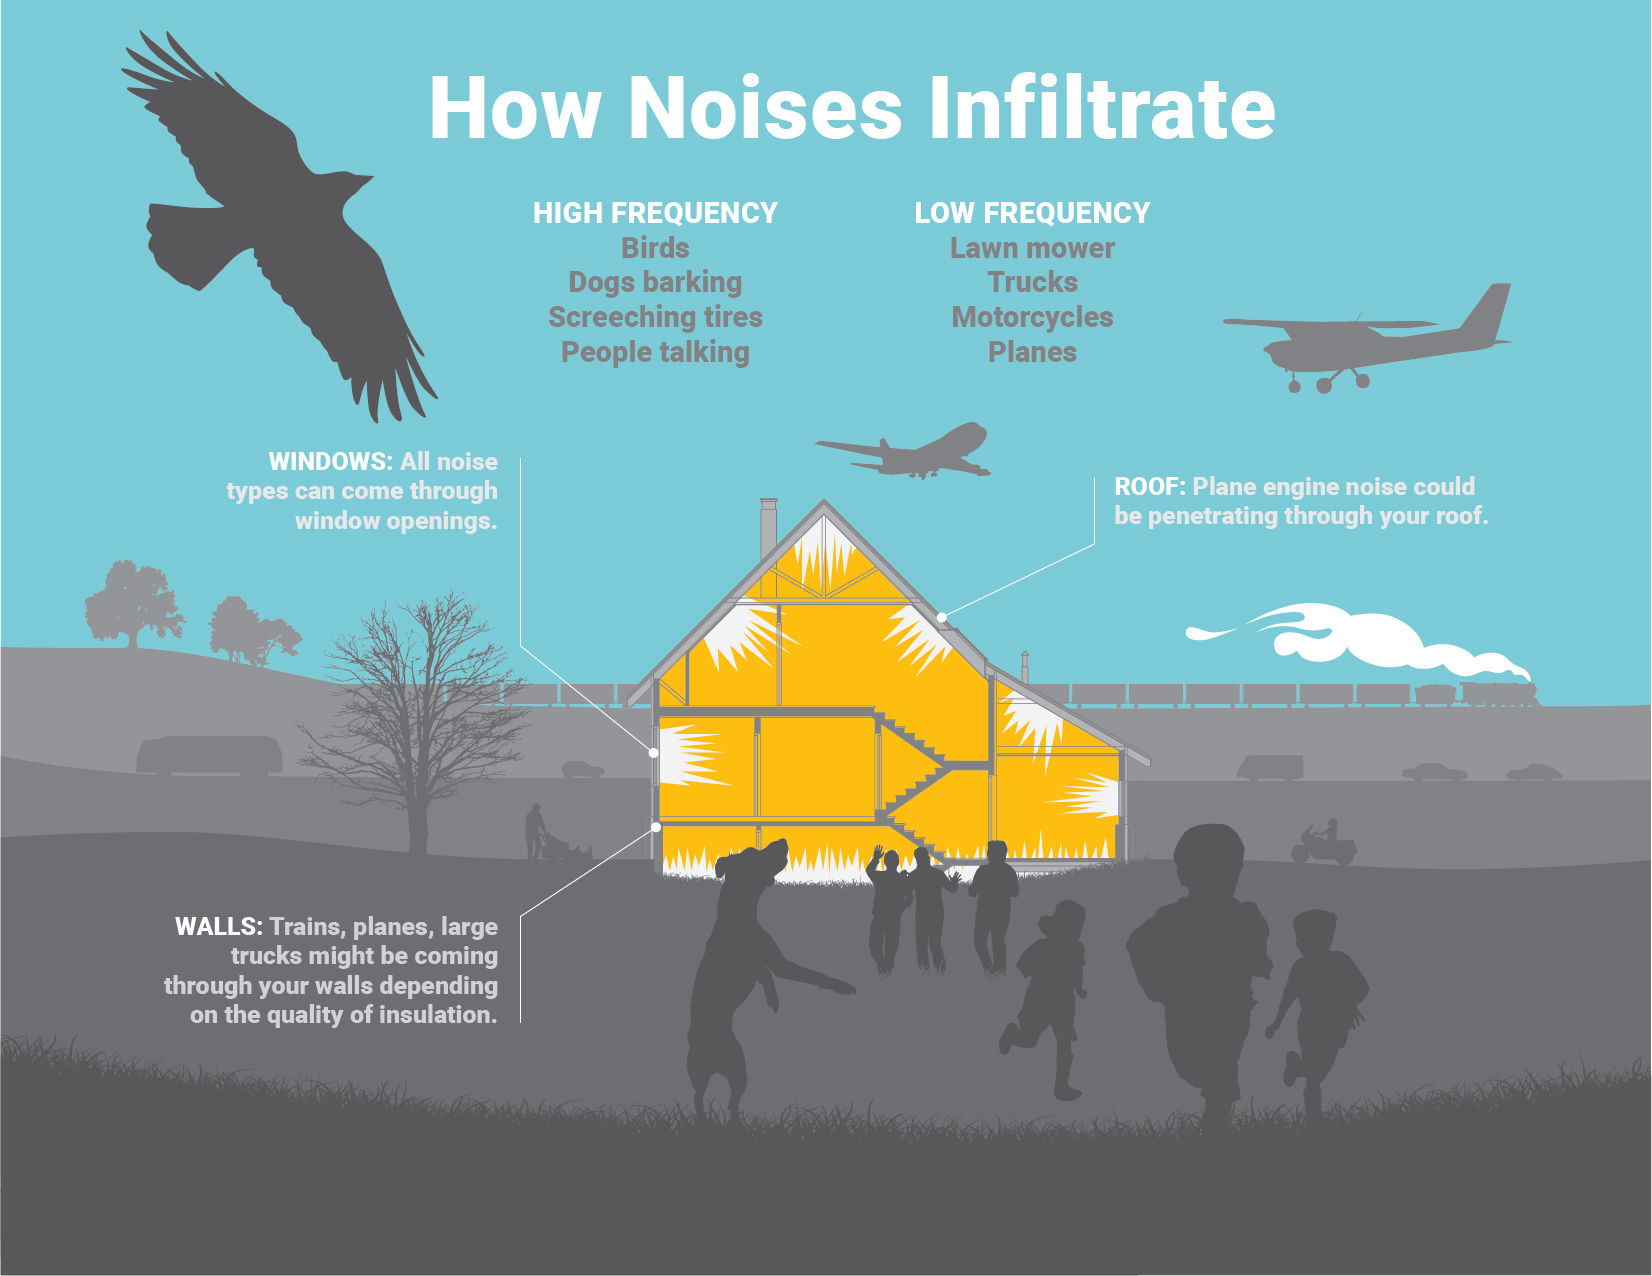 Graphic showing various sound frequencies & how they infiltrate: insulate against noise pollution